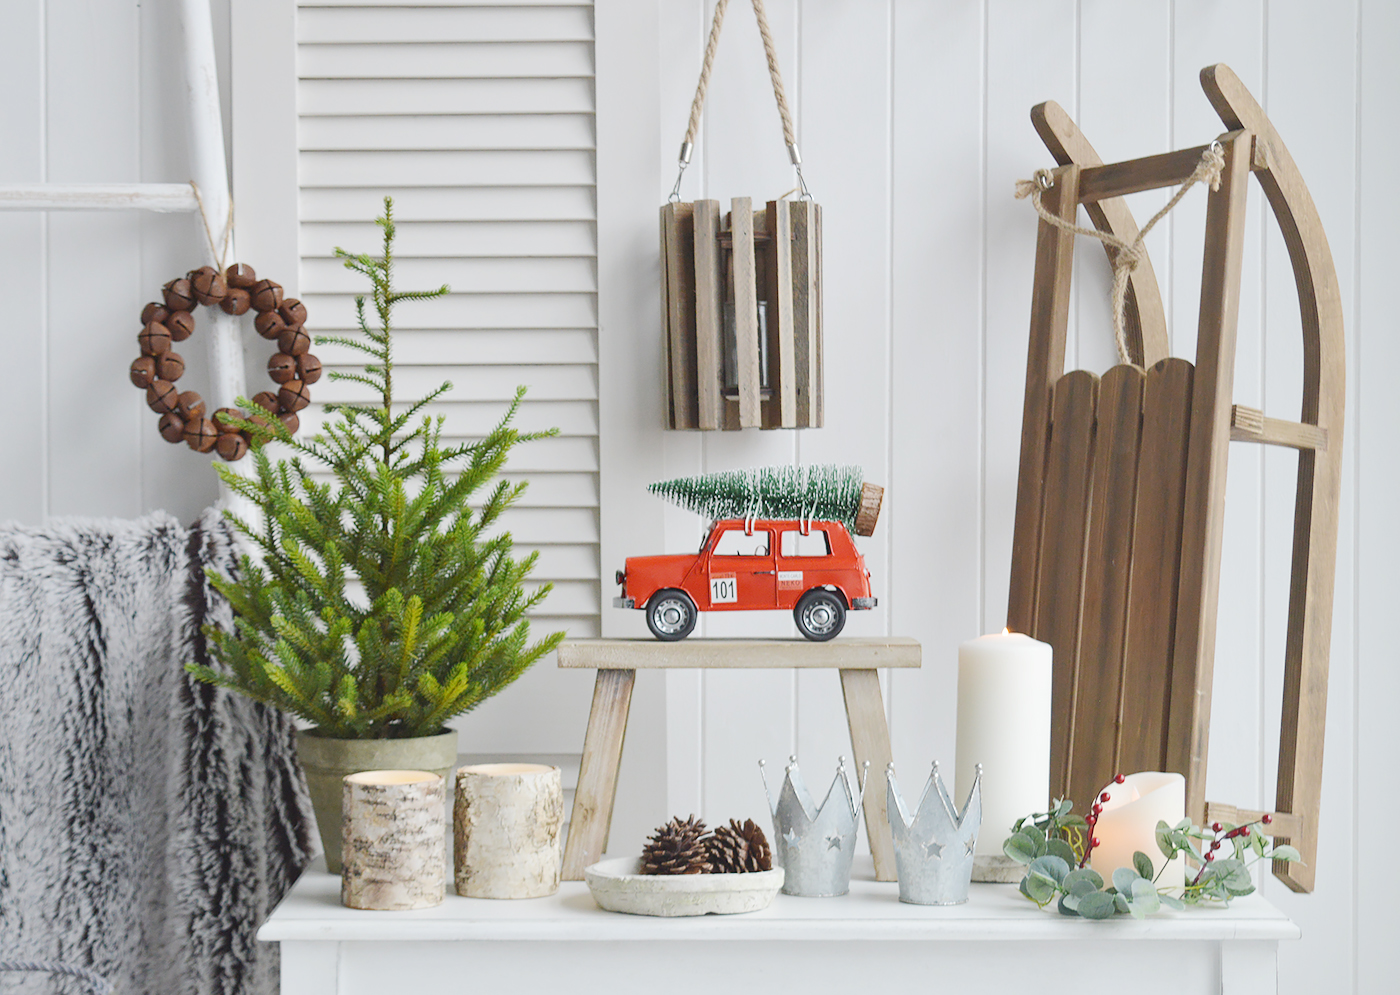 New England style Christmas decor from The White Lighthouse. Decorative wooden sleigh, red car with Christmas trees, artificial Christmas tree and festive candle holders and LED bark candles